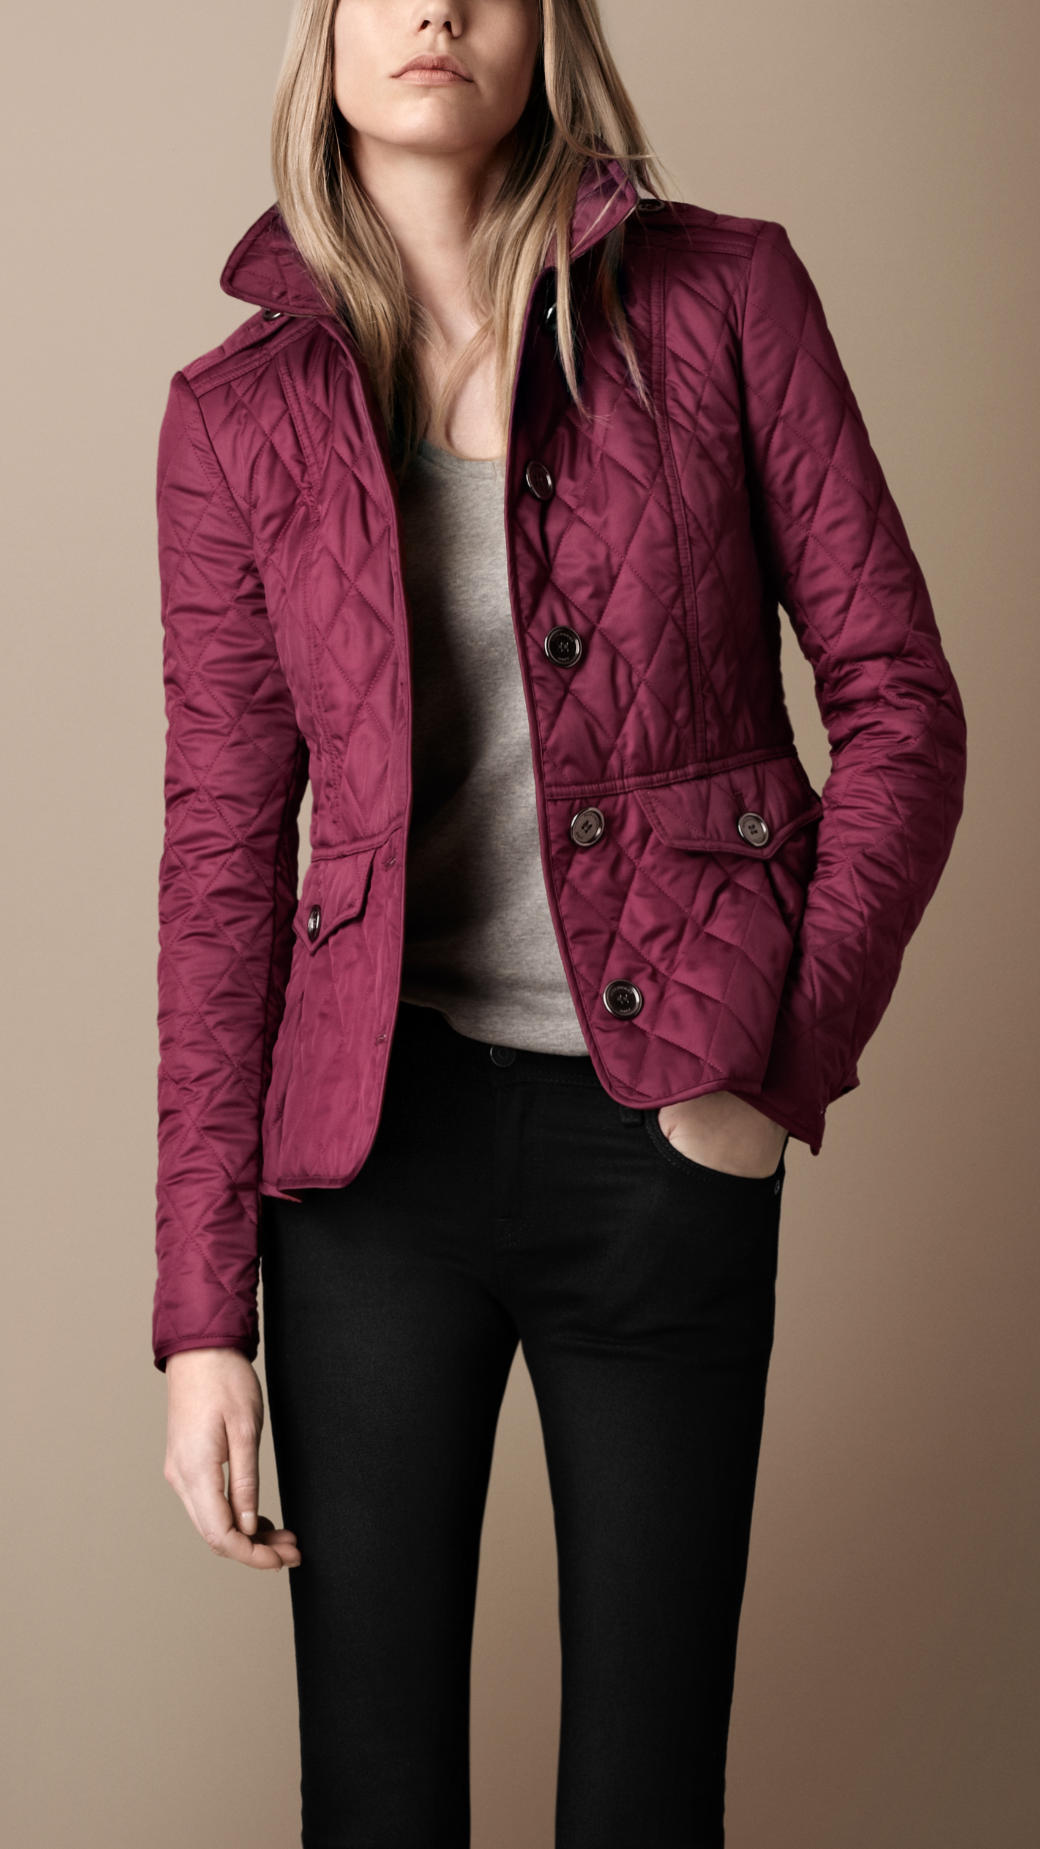 Burberry Brit Fitted Quilted Jacket in Dusty Damson (Purple) - Lyst